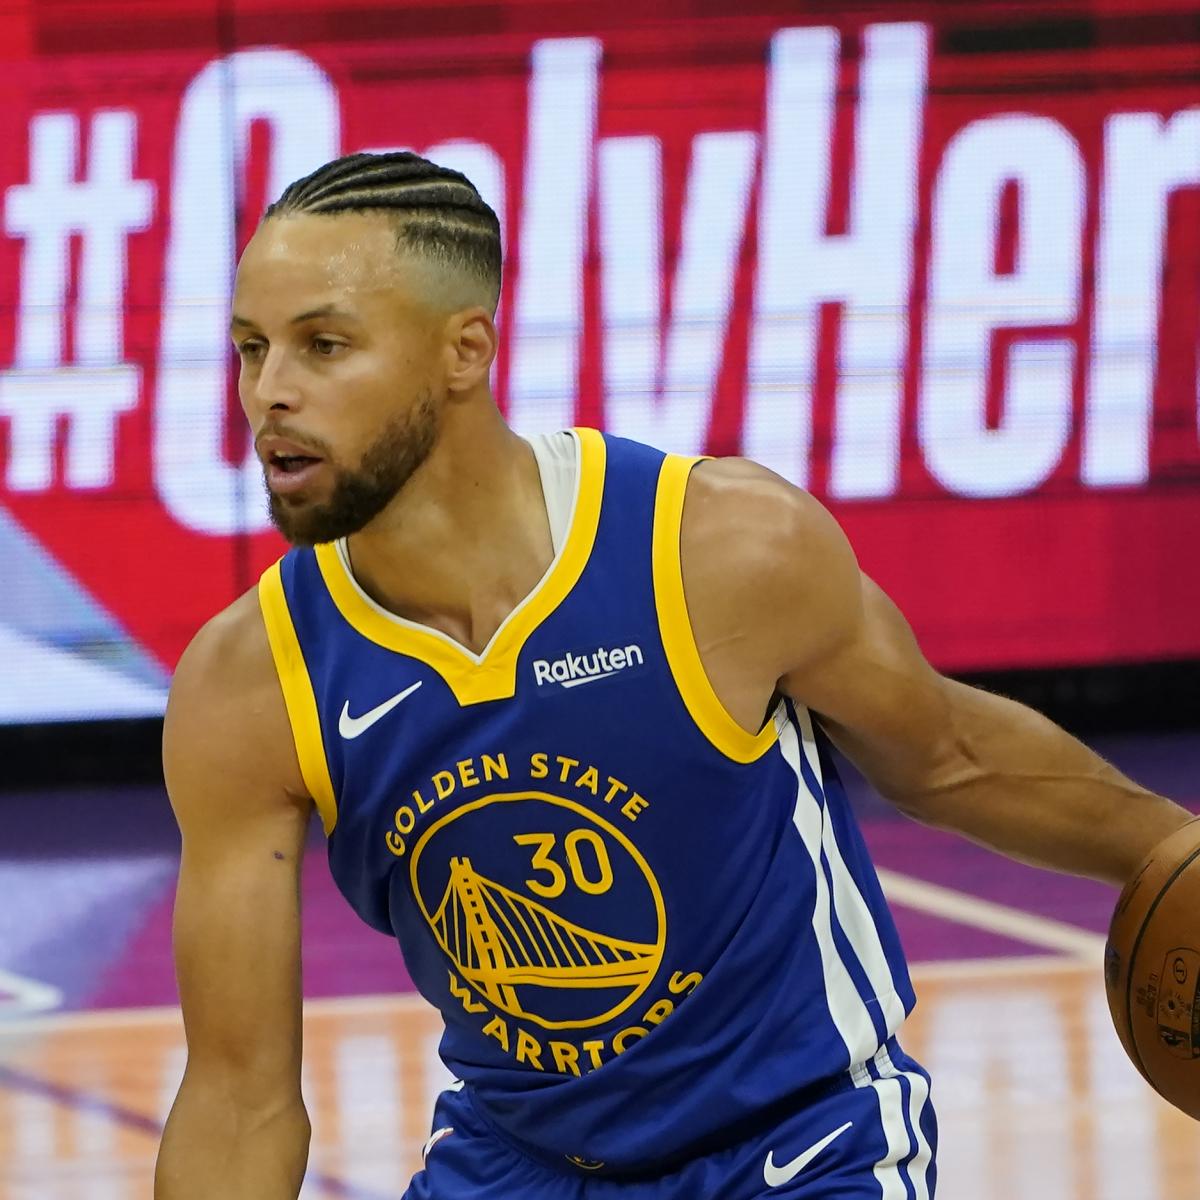 The Day Steph Curry Made 105 3-Point Shots in a Row - Bloomberg